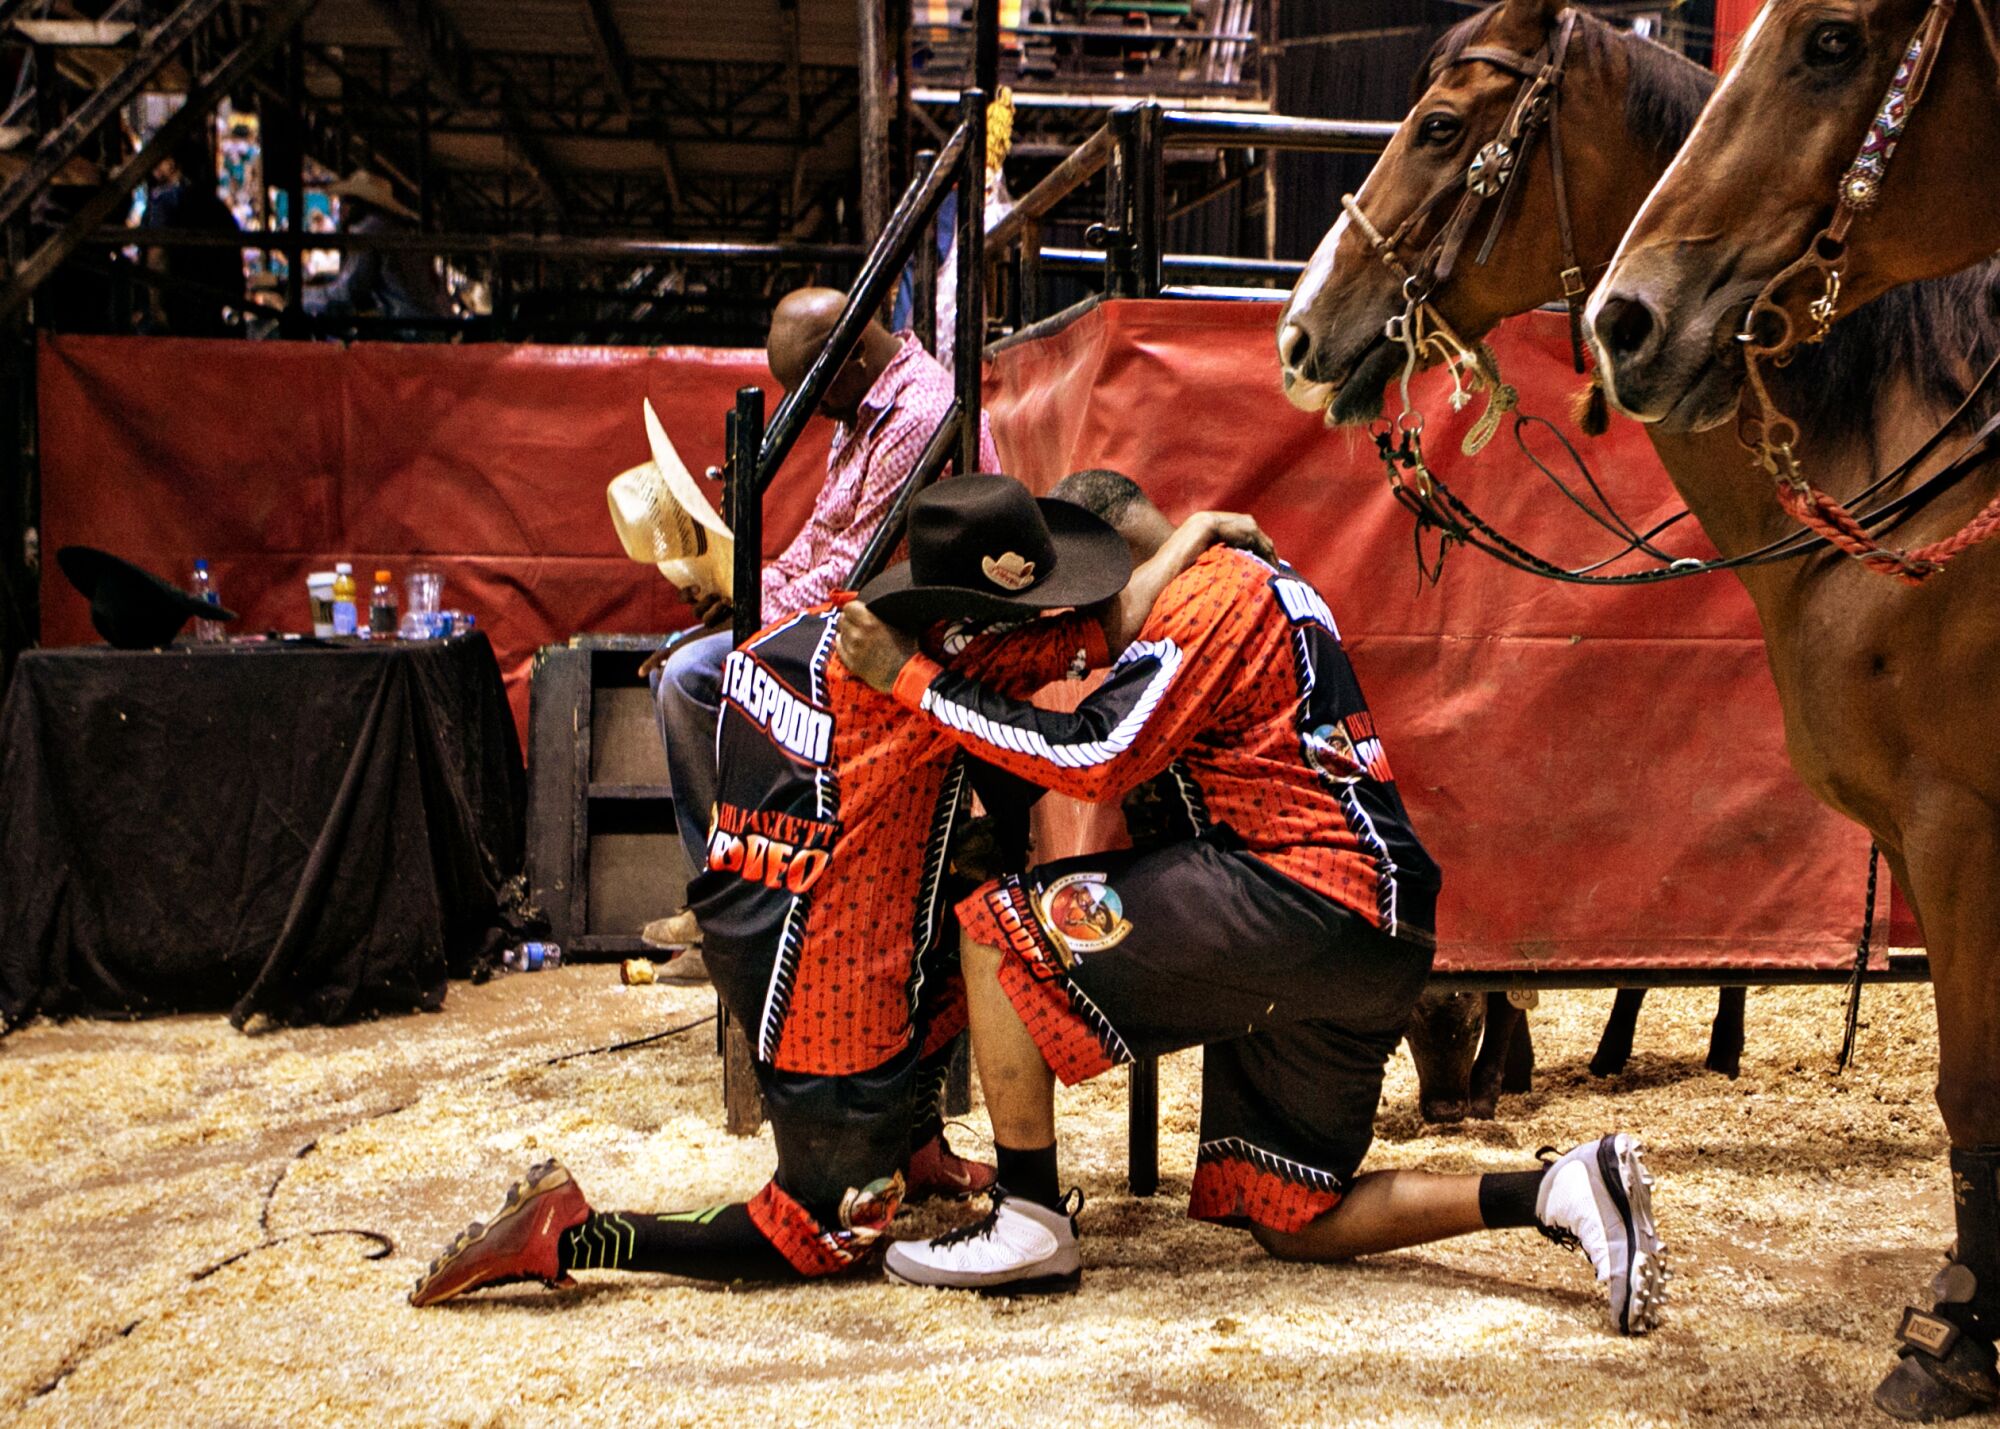 Two men huddle and kneel in the sawdust beside two horses, as a man in the background removes his hat and bows his head.